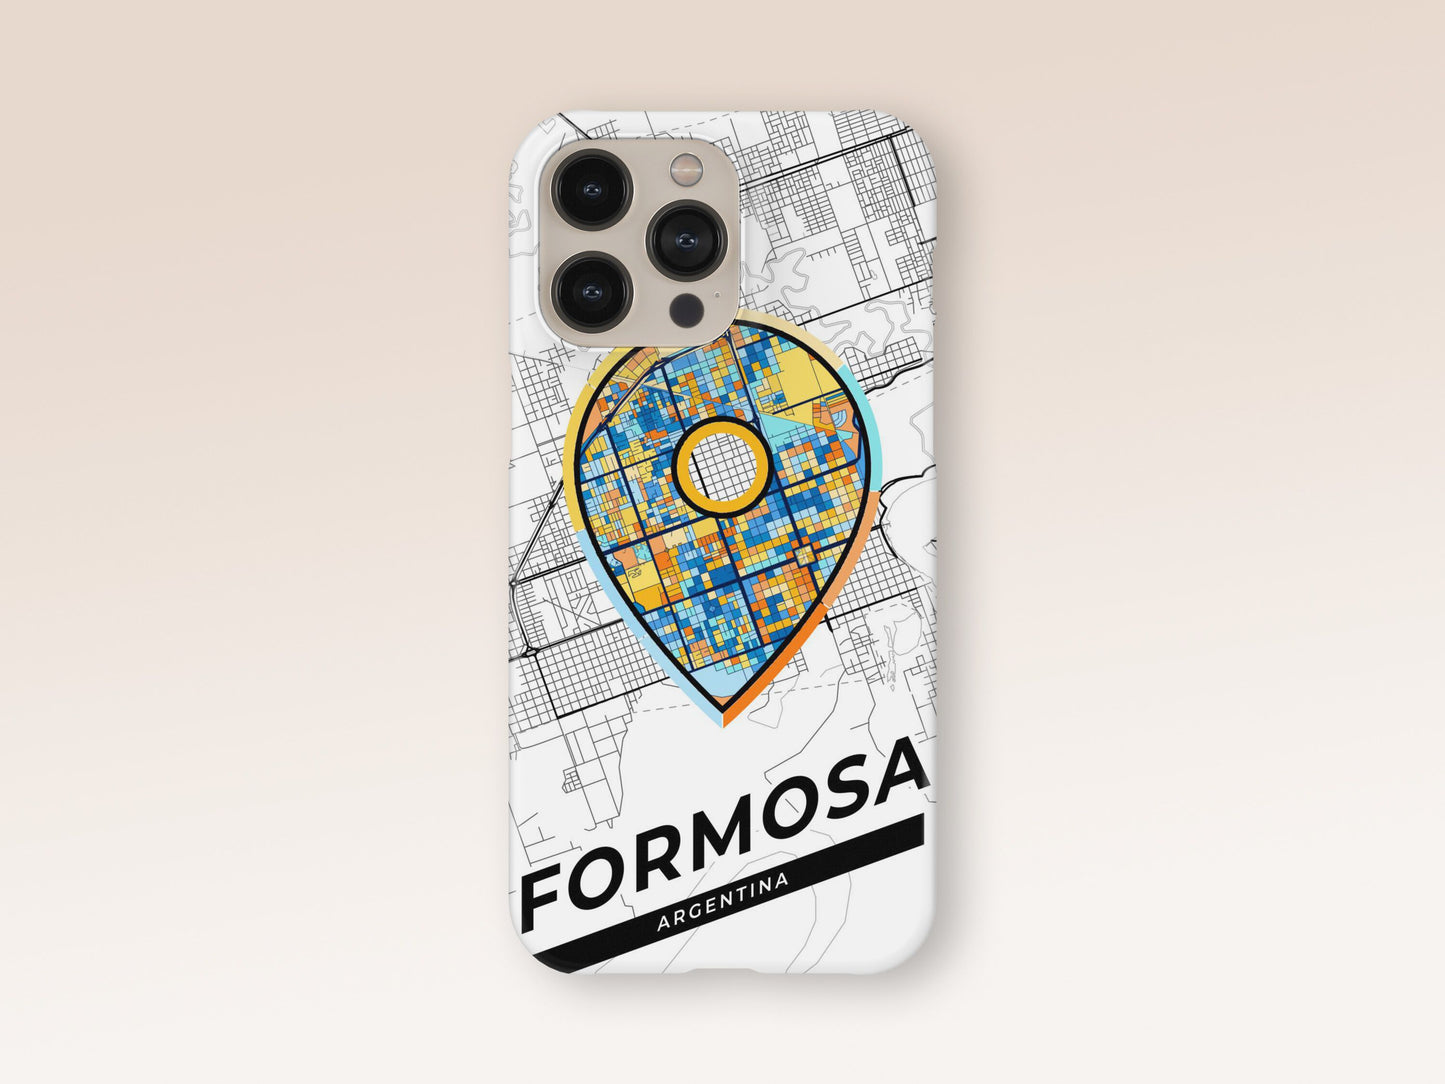 Formosa Argentina slim phone case with colorful icon. Birthday, wedding or housewarming gift. Couple match cases. 1